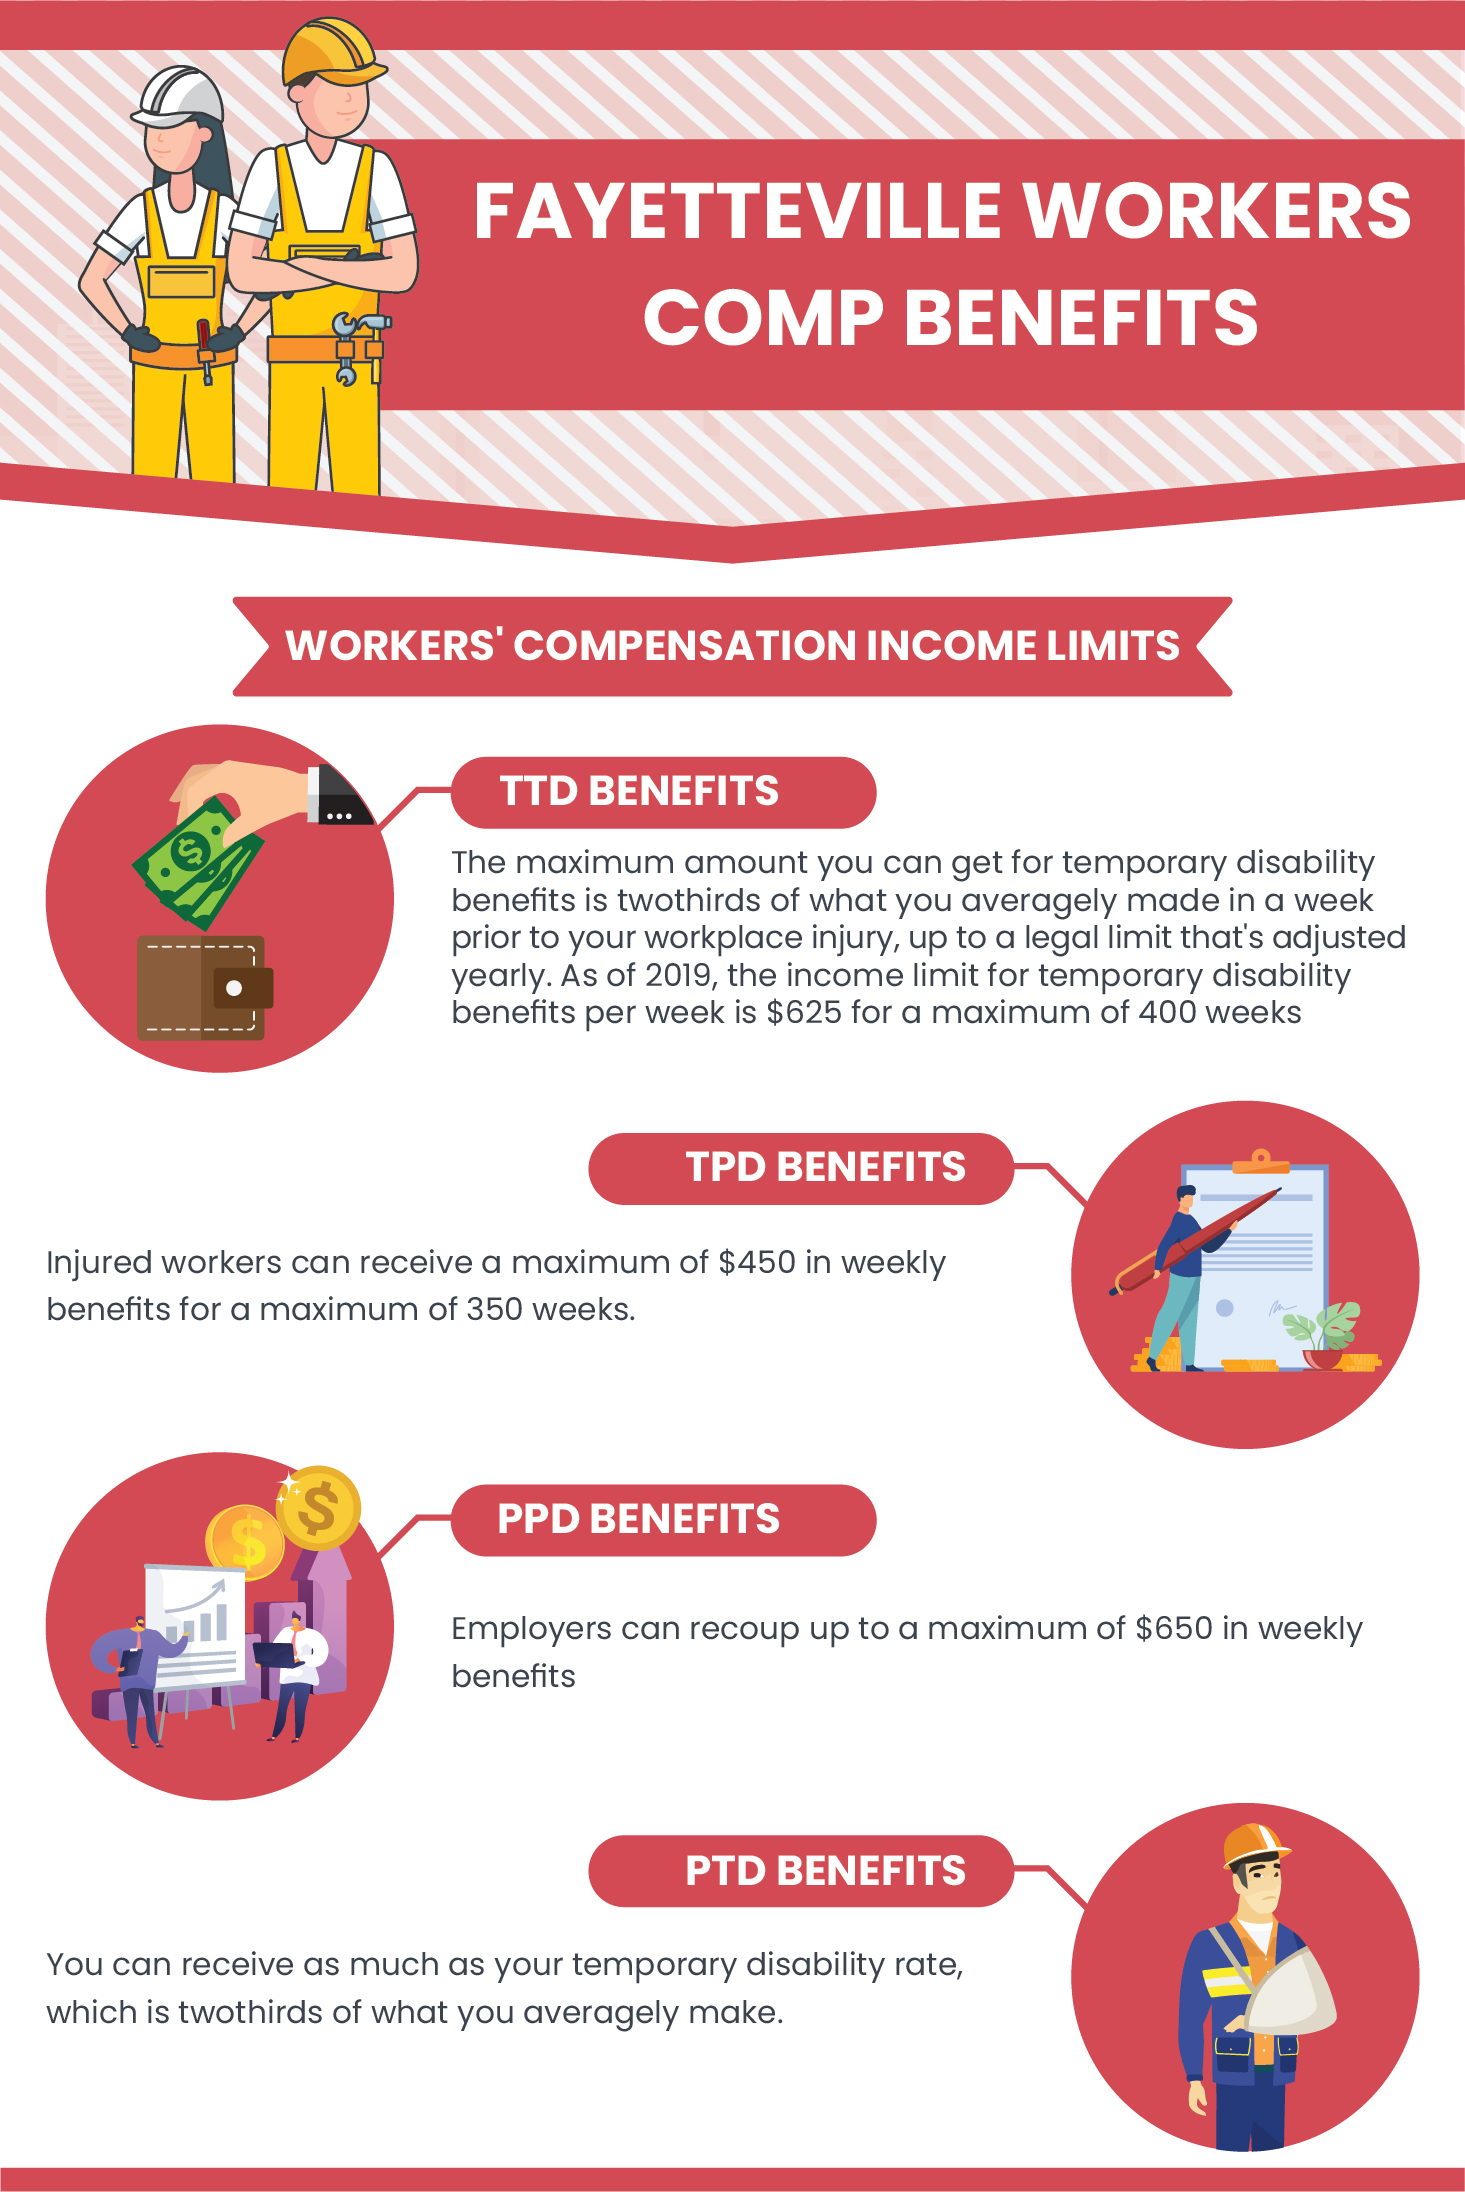 Fayetteville Workers Compensation Benefits Infographic